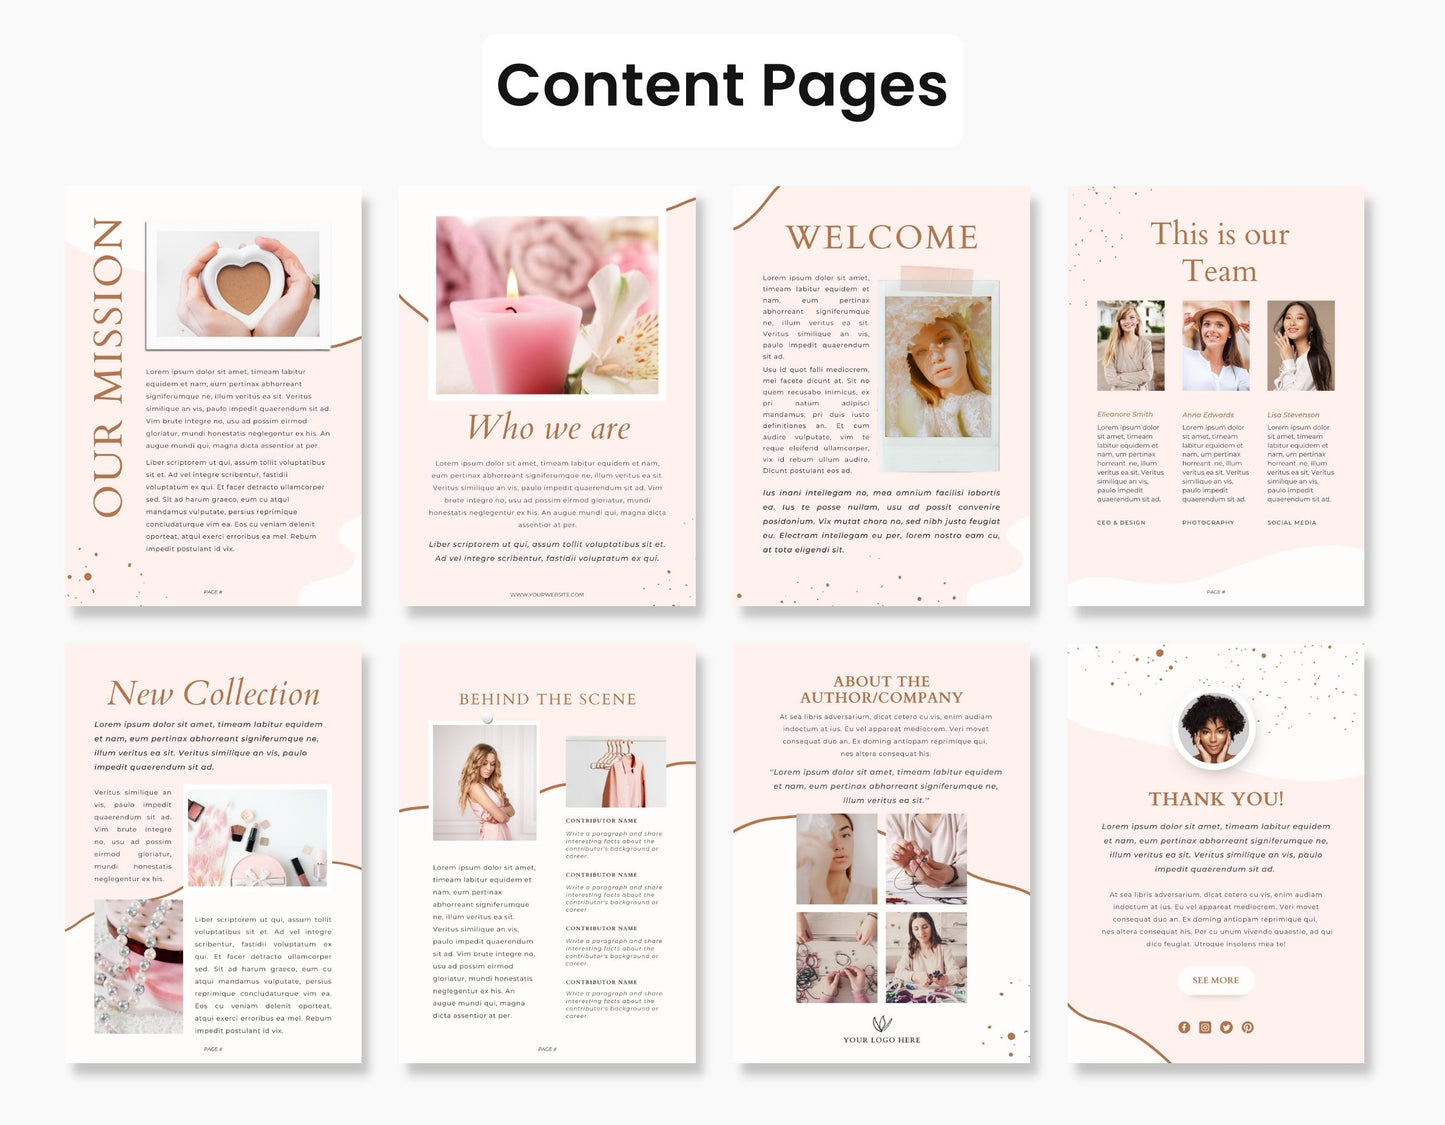 E-commerce Product Catalog Template Canva Pink DigiPax